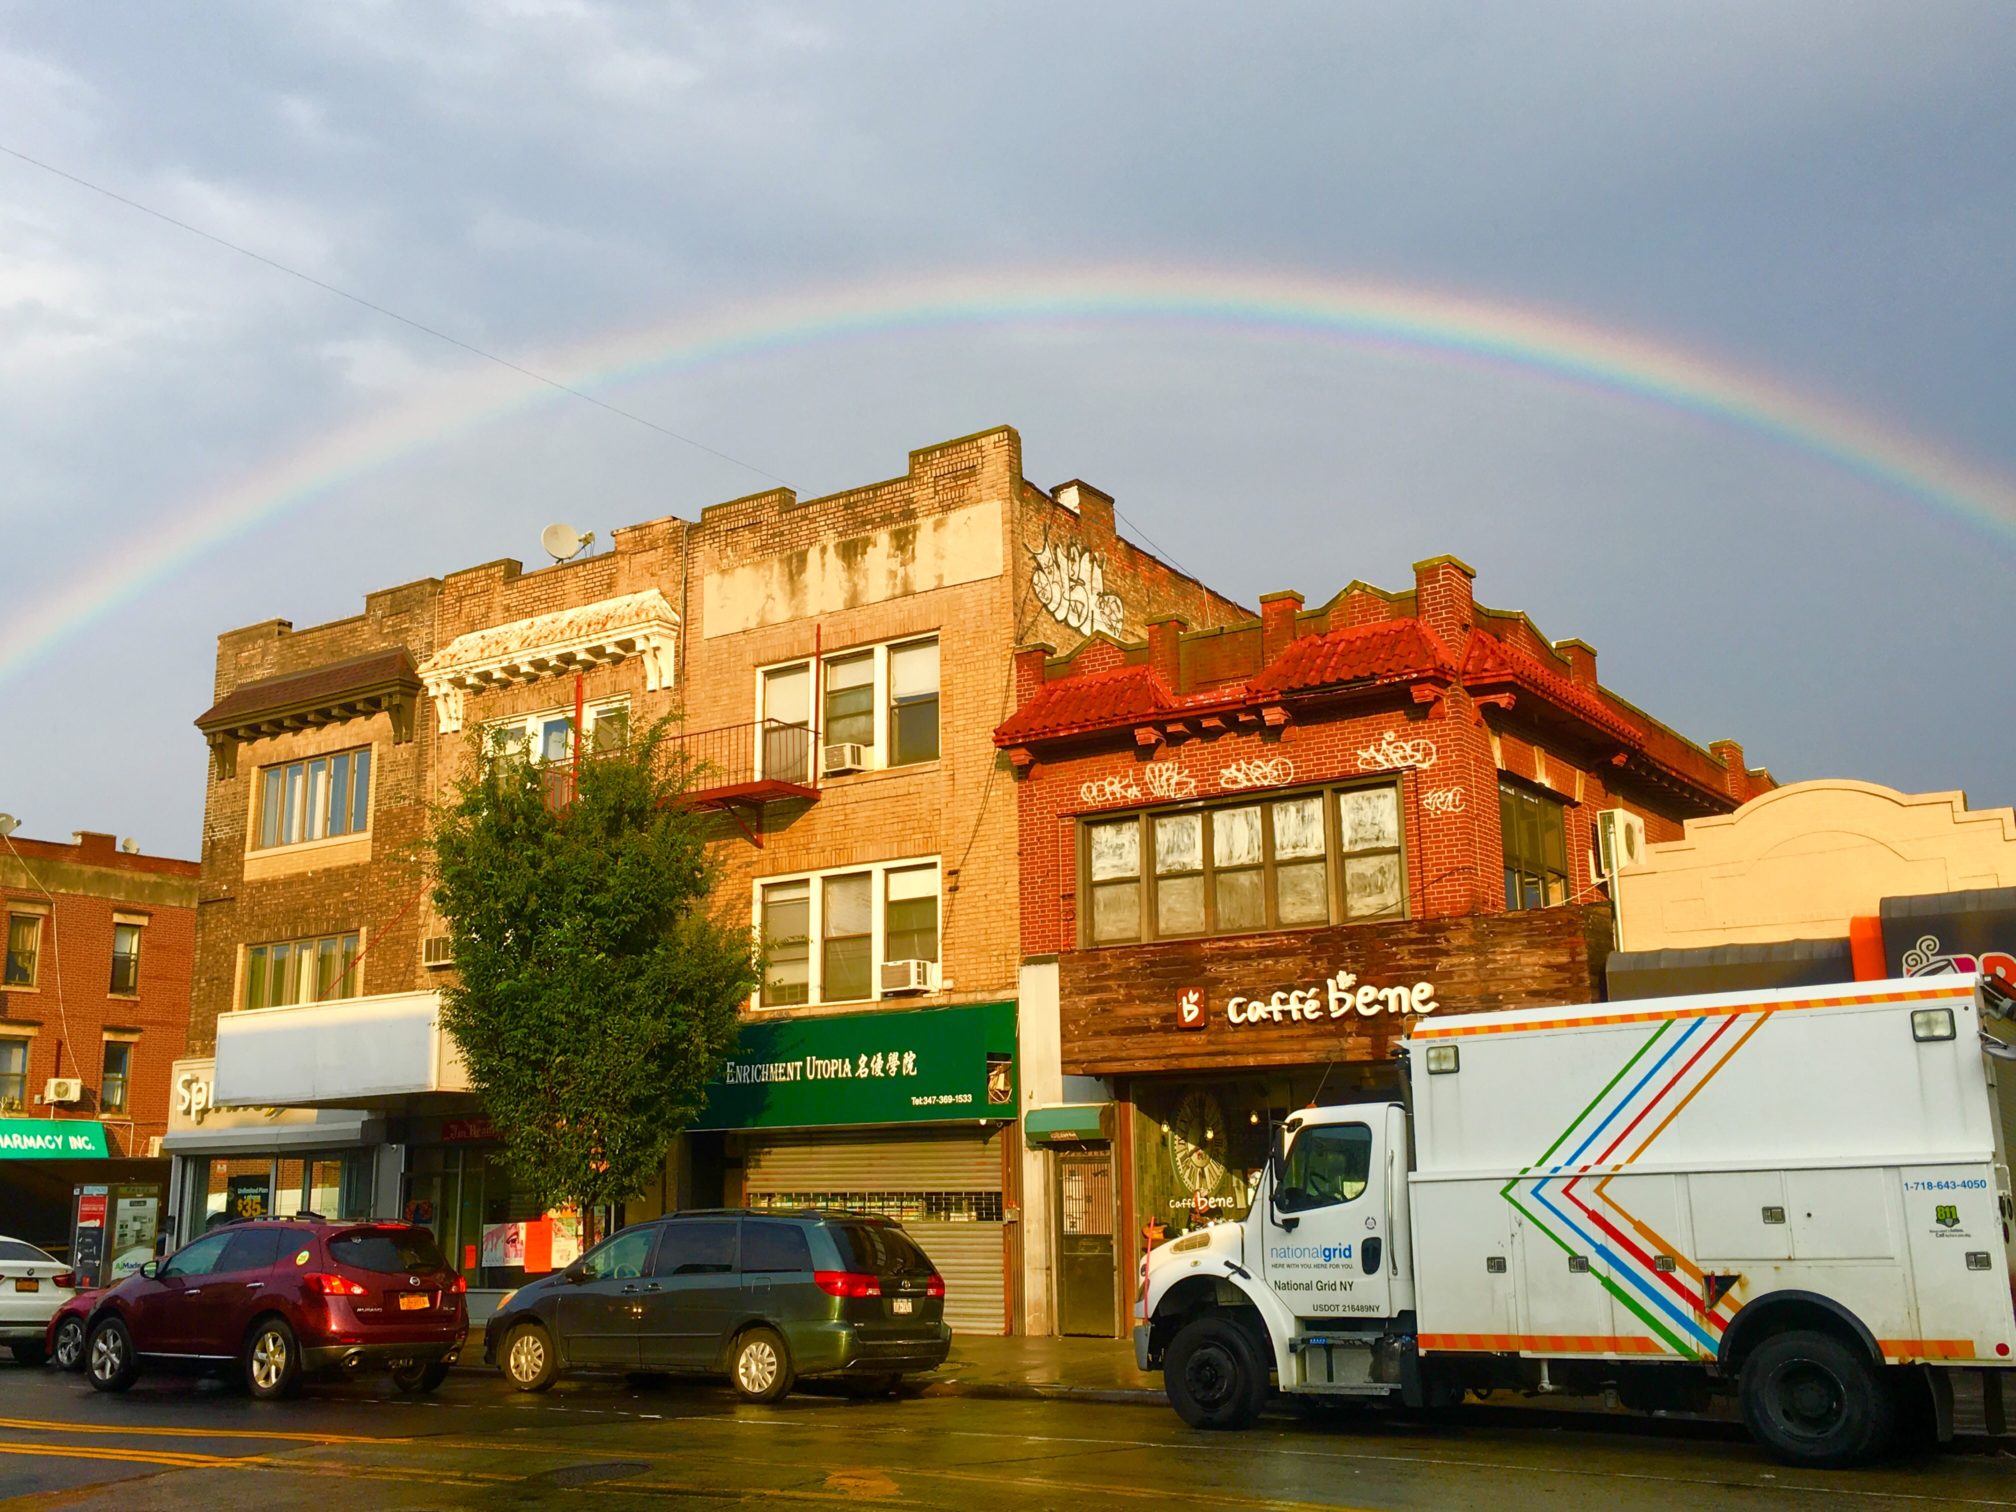 I went shopping on 18th Avenue the other day. The first thing I saw was a rainbow. Eagle photo by Lore Croghan